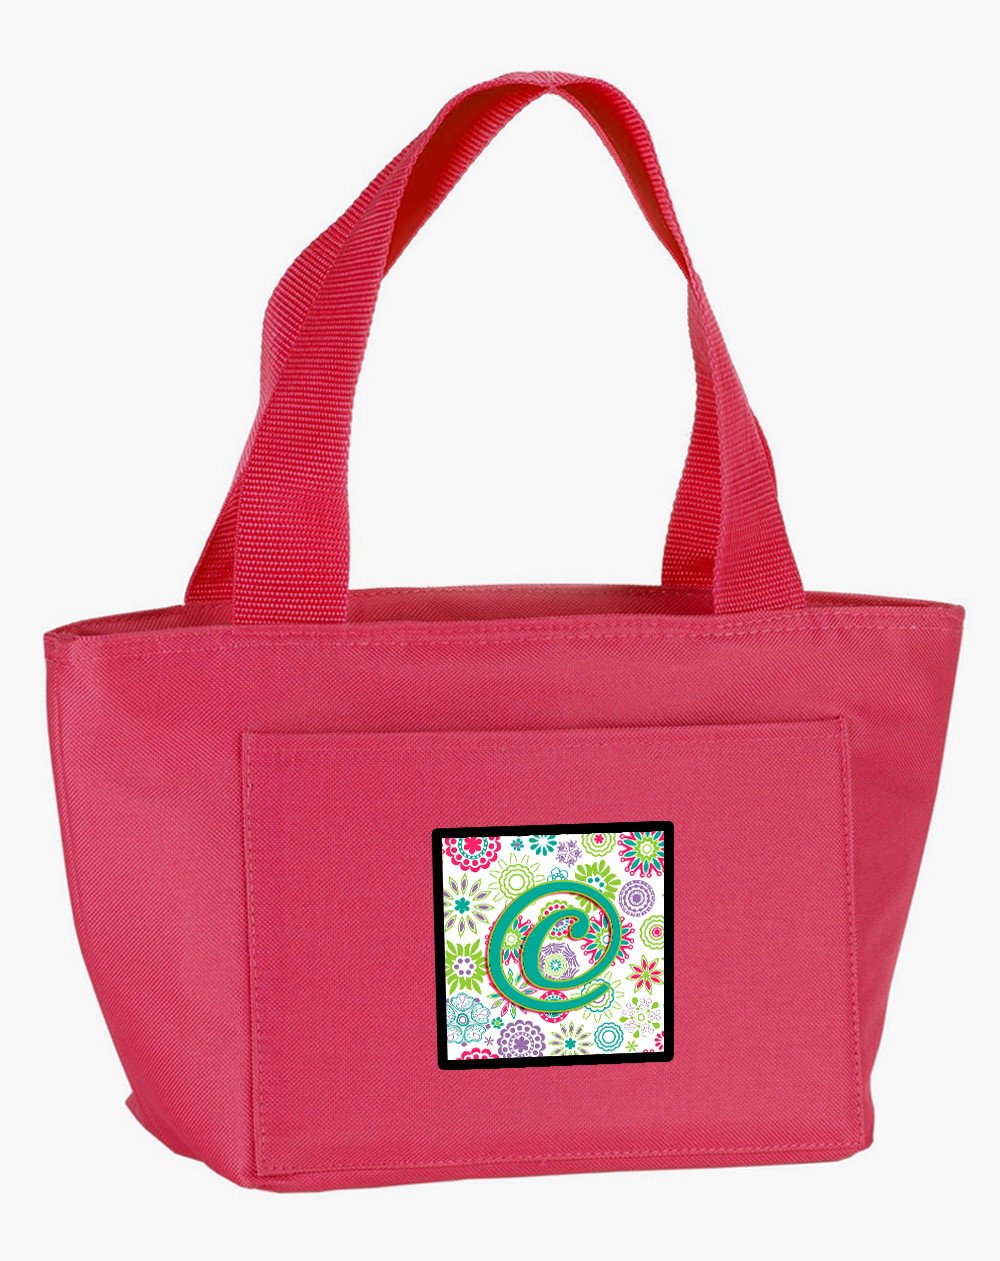 Letter C Flowers Pink Teal Green Initial Lunch Bag CJ2011-CPK-8808 by Caroline's Treasures